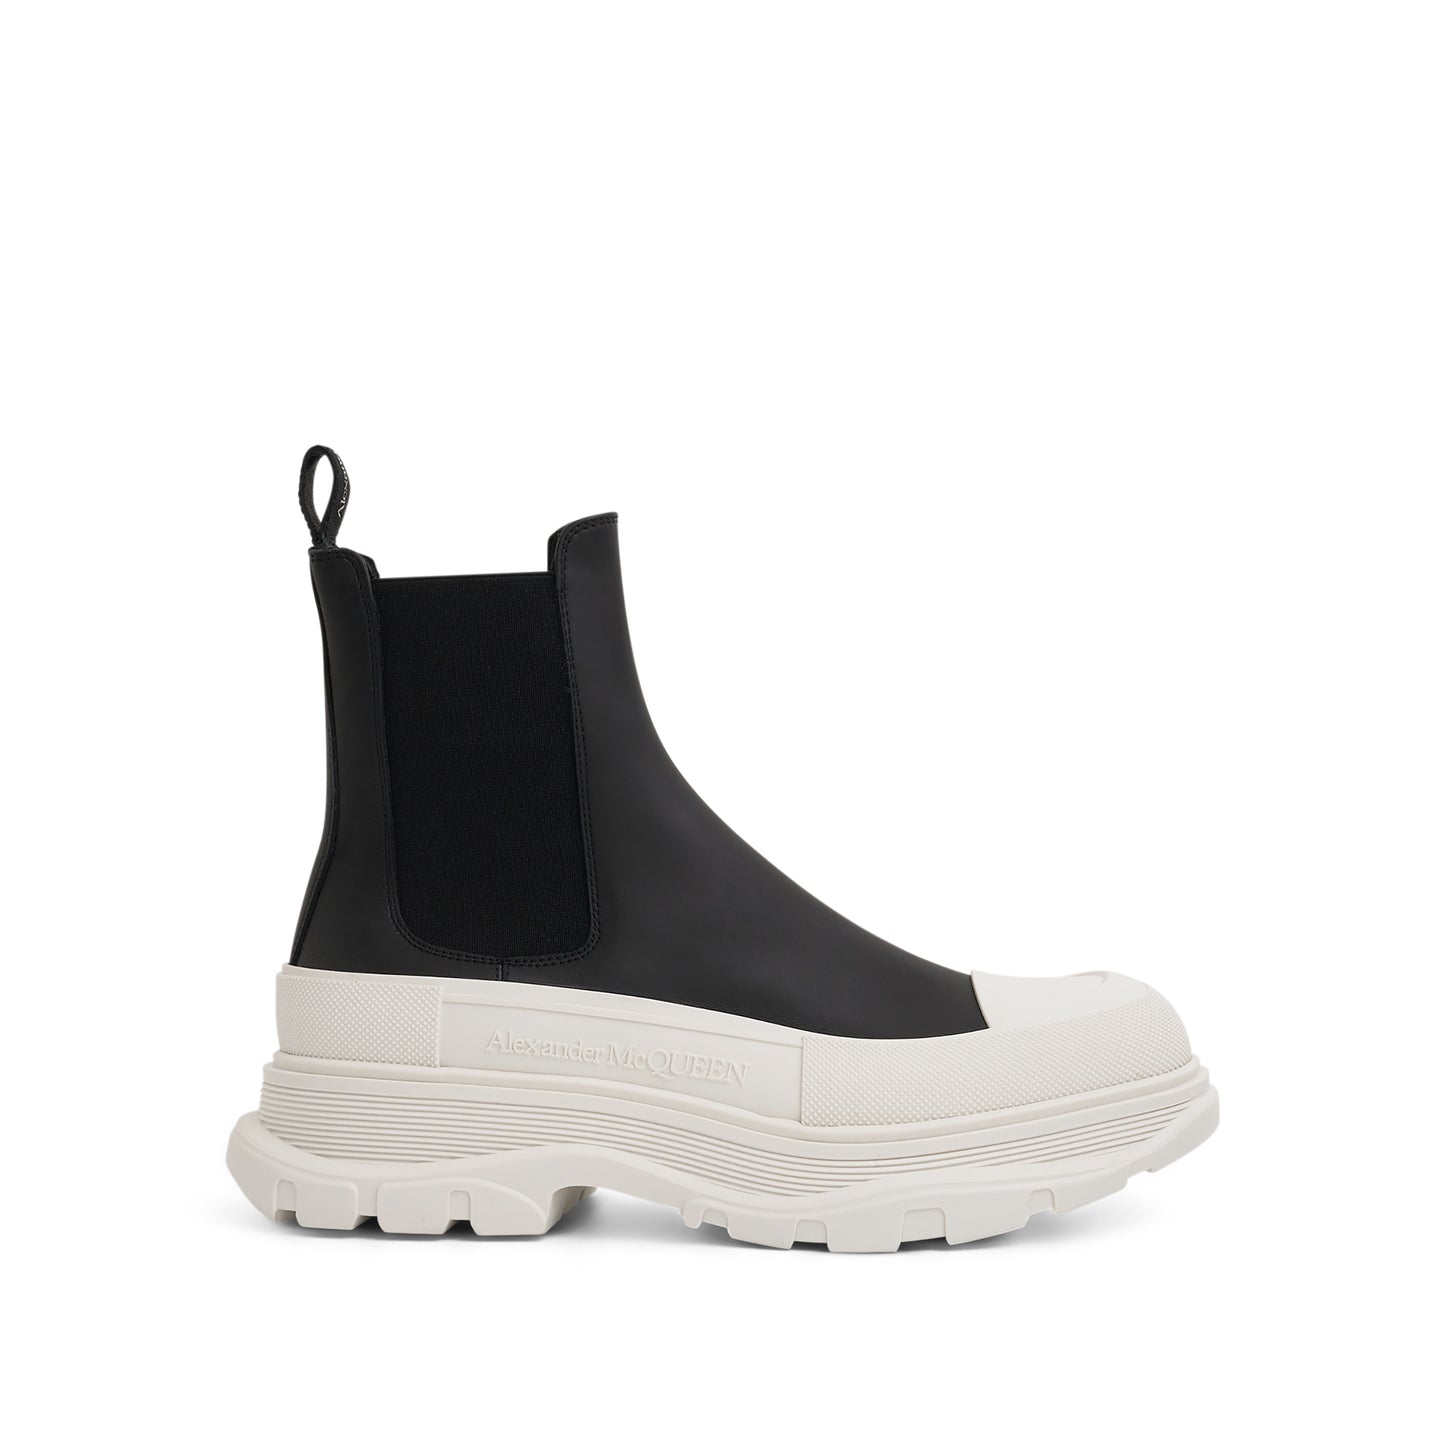 Tread Slick Ankle Boots in Black/White